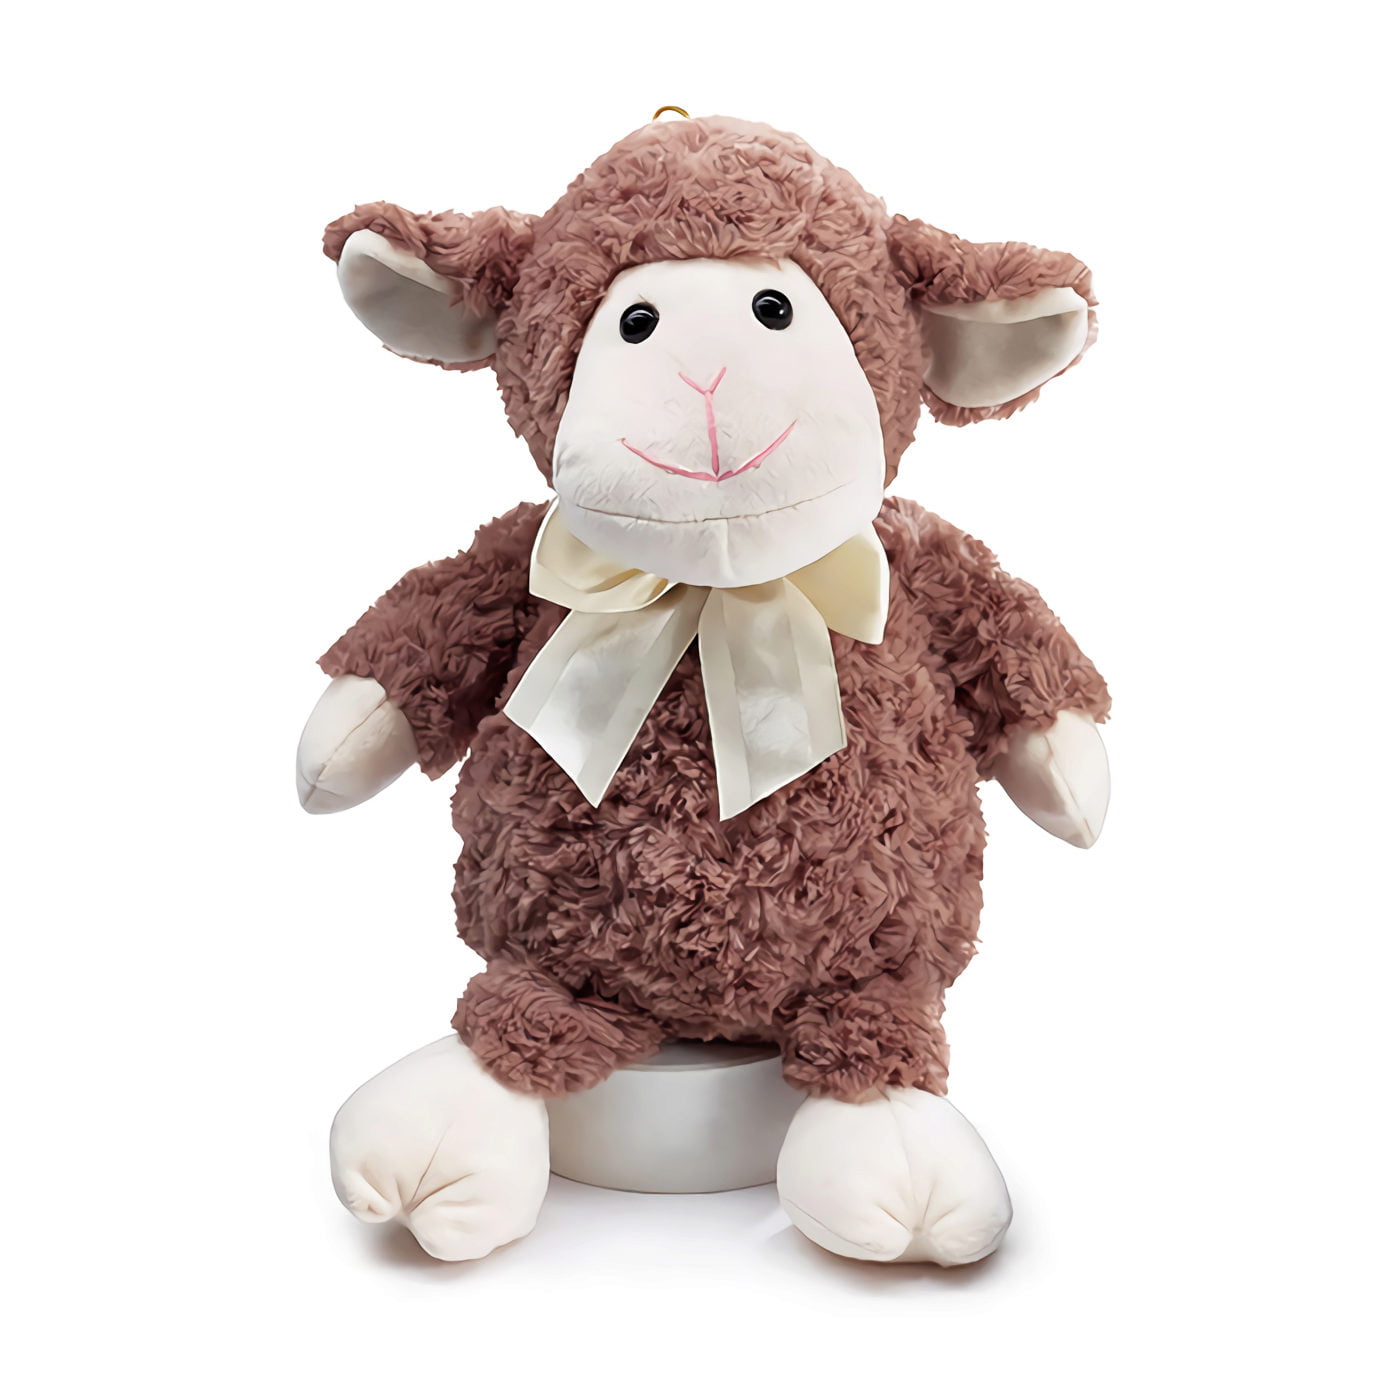 Douglas Clementine 5" Lamb Stuffed Animal Toy White for sale online 